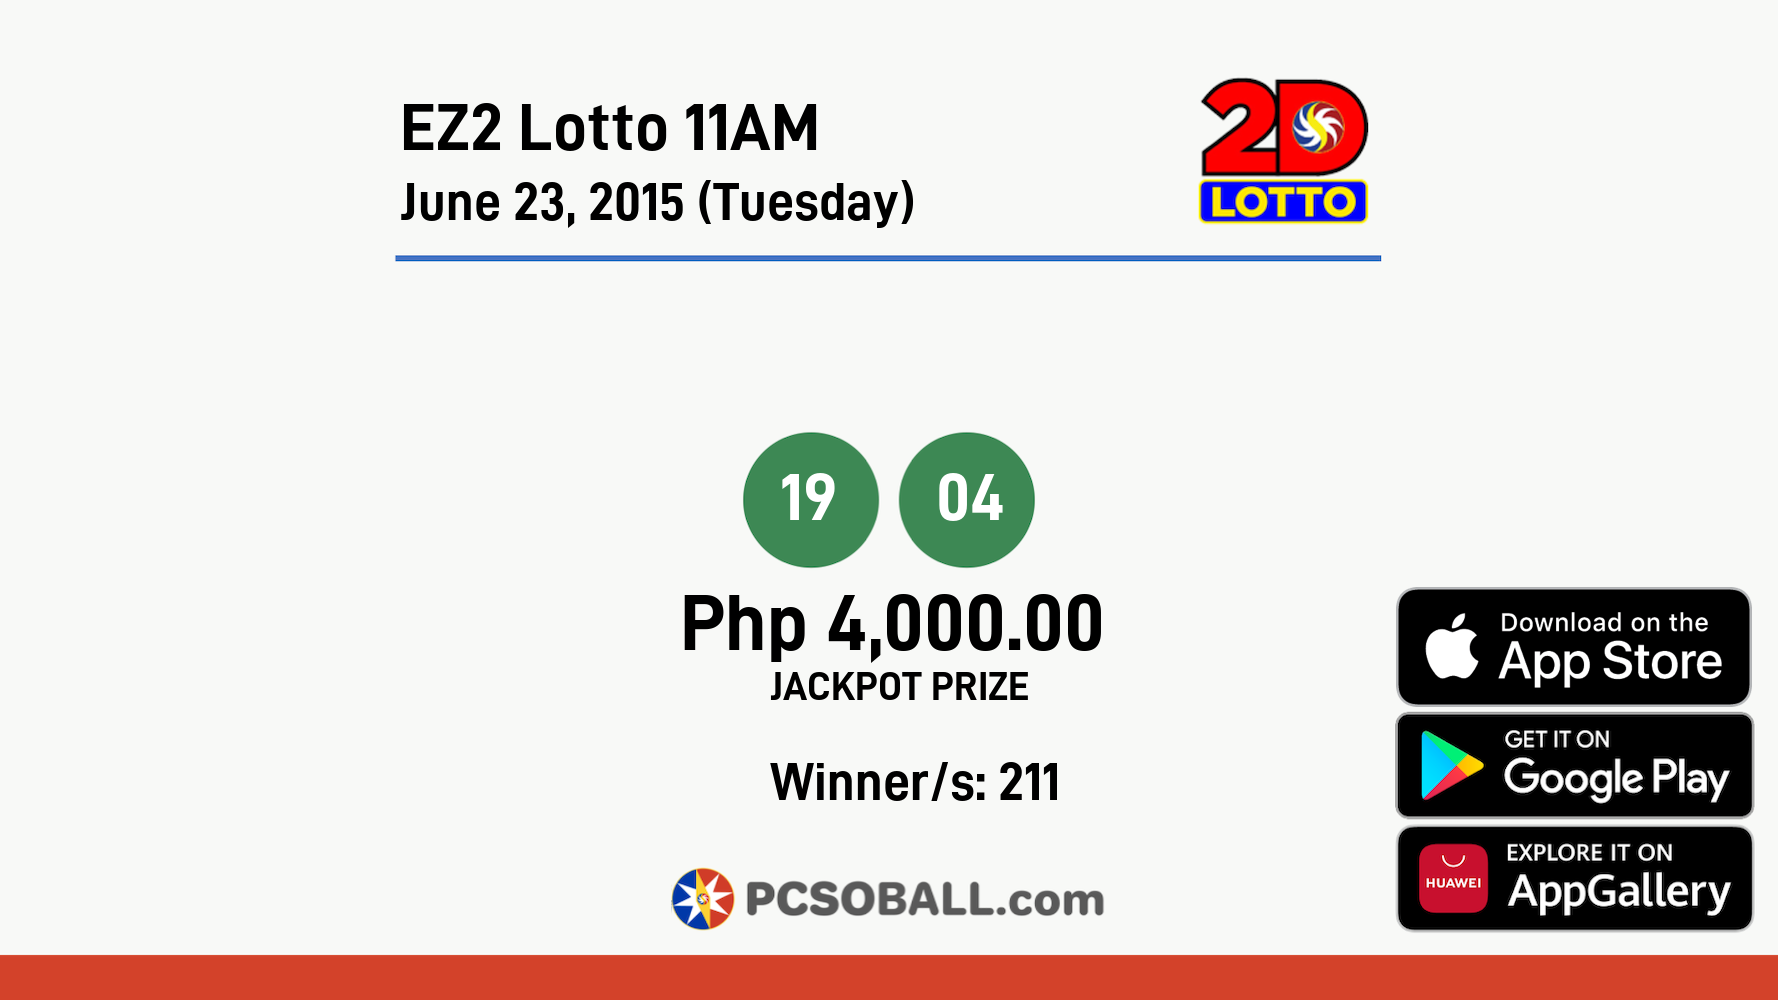 EZ2 Lotto 11AM June 23, 2015 (Tuesday) Result